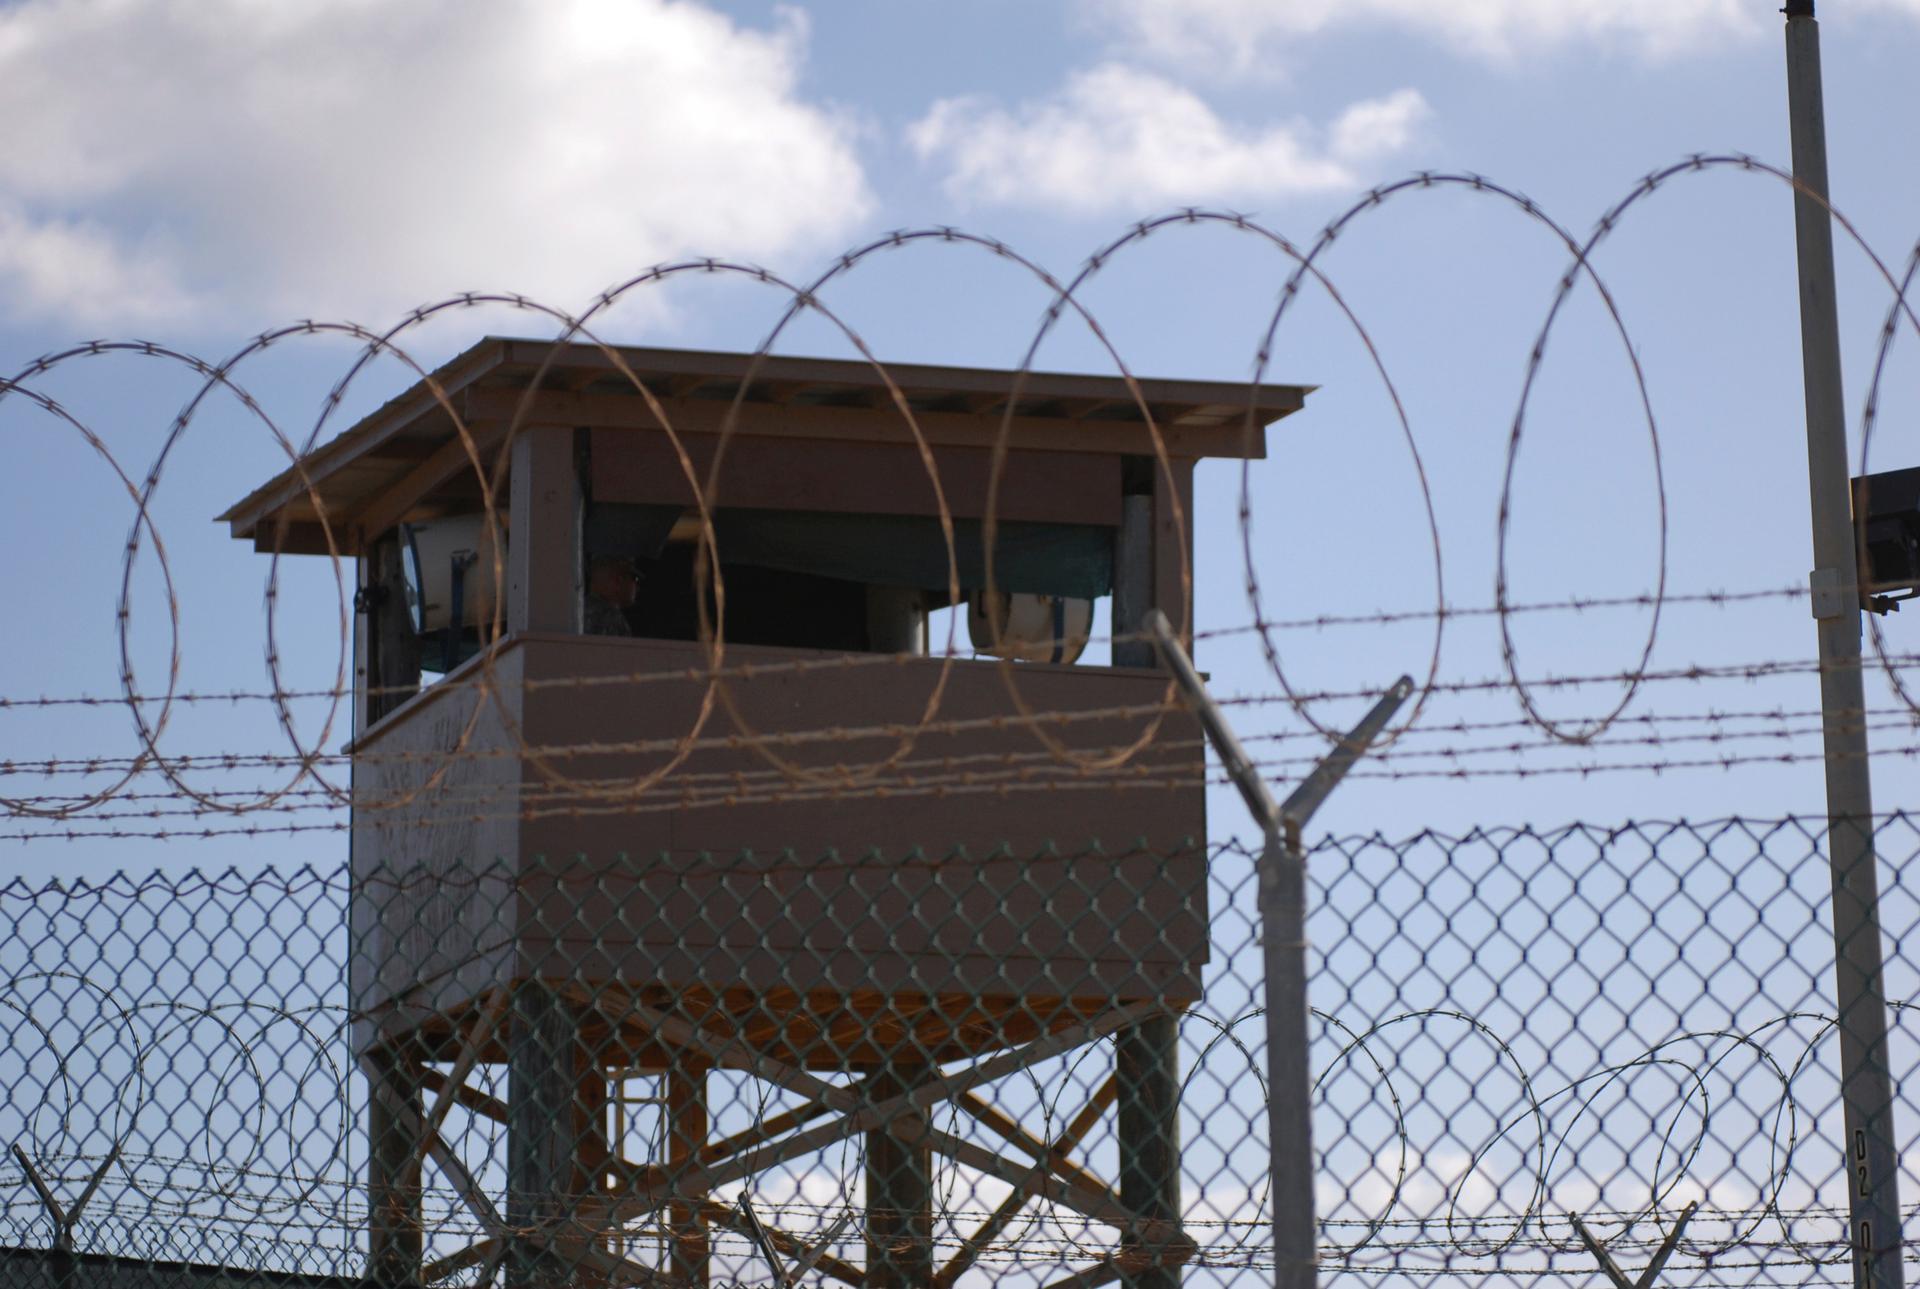 A soldier stands guard in a tower overlooking Camp Delta at Guantanamo Bay naval base in a December 31, 2009 file photo provided by the US Navy.